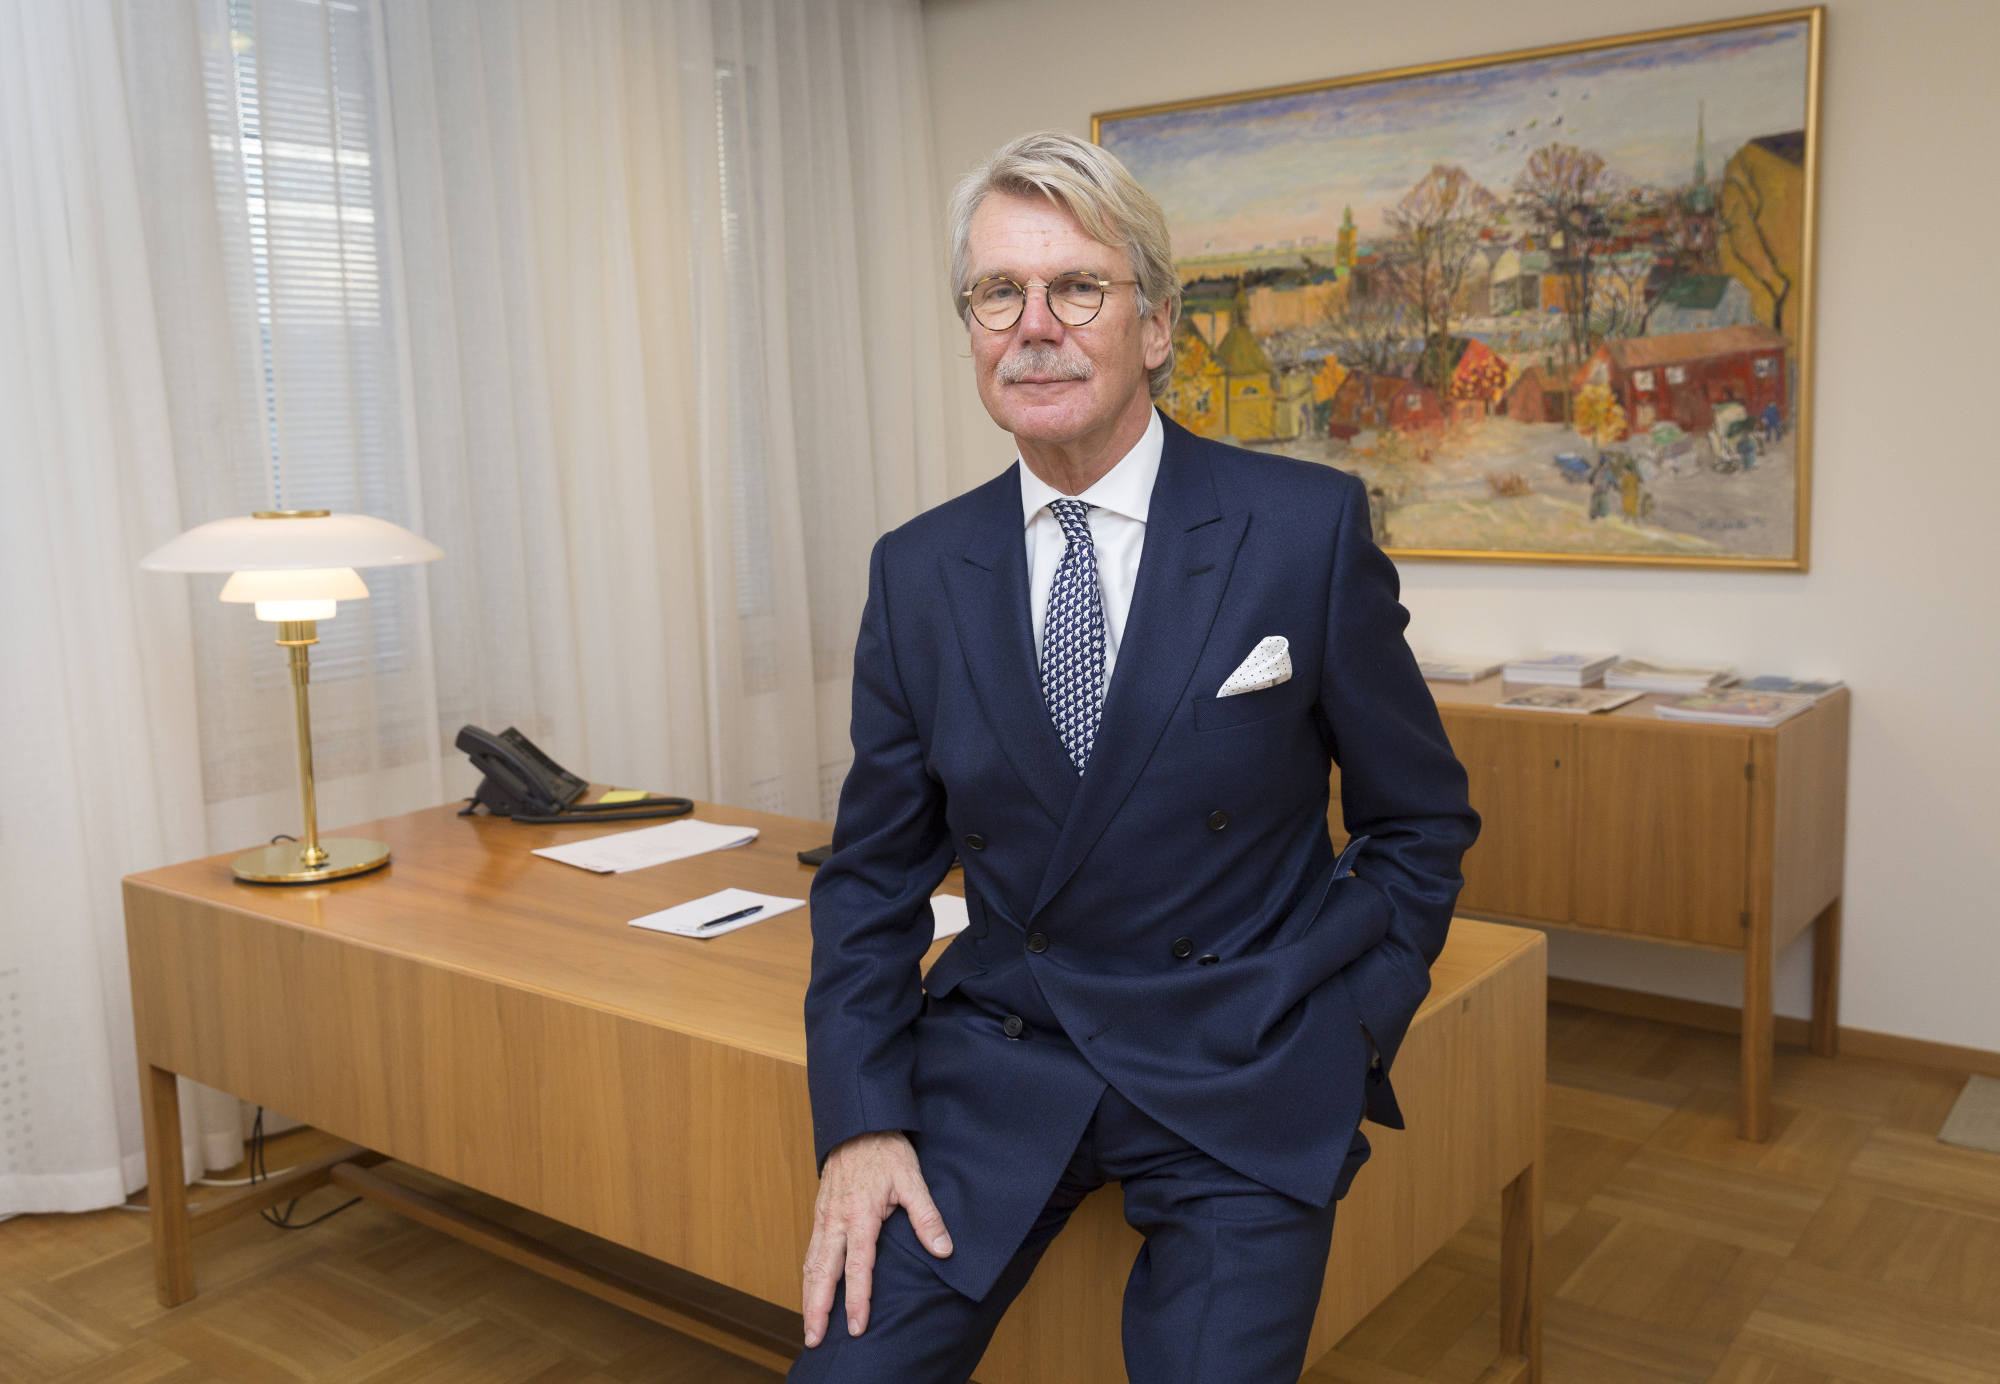 Bjoern Wahlroos, chairman of Nordea Bank AB and Sampo Oyj, poses for a photograph following an interview at the Nordea headquarters in Stockholm, Sweden, on Thursday, Nov. 24, 2016. Wahlroos said there's little chance hell resume talks to merge with ABN Amro Group NV, and signaled no interest in buying shares in the bank from the Dutch government. Photographer: Johan Jeppsson/Bloomberg